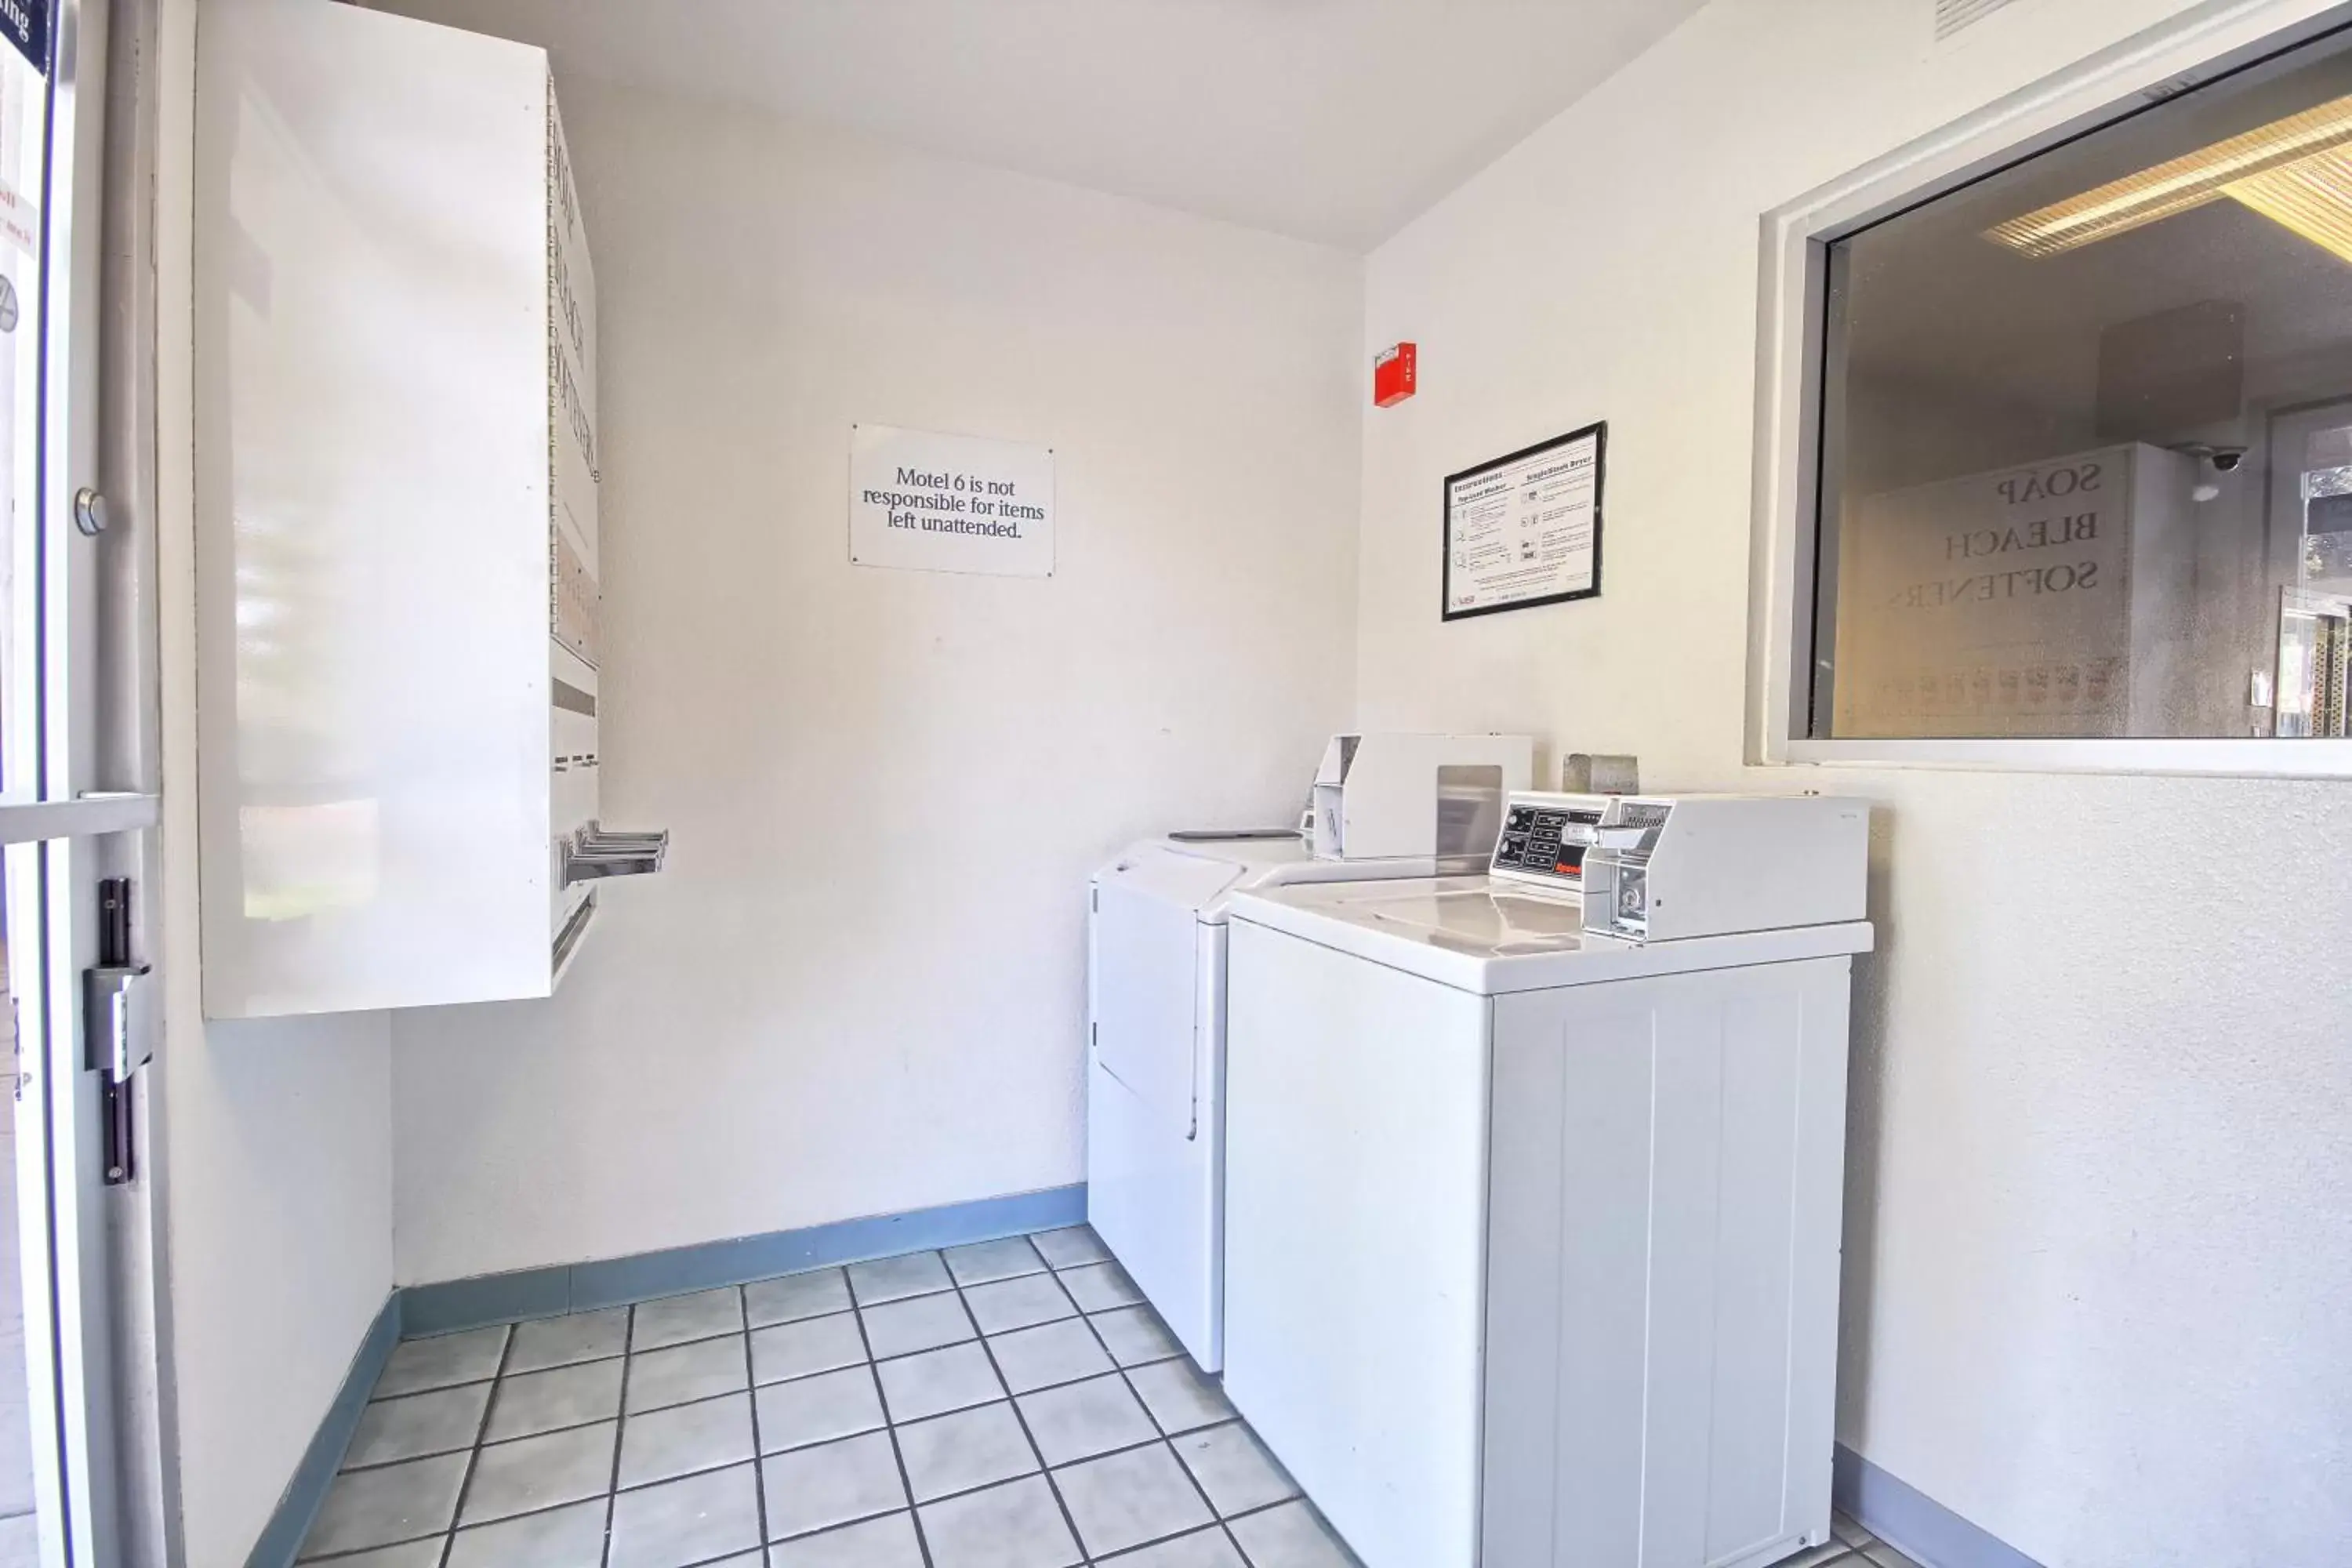 Area and facilities, Lobby/Reception in Motel 6-Porterville, CA